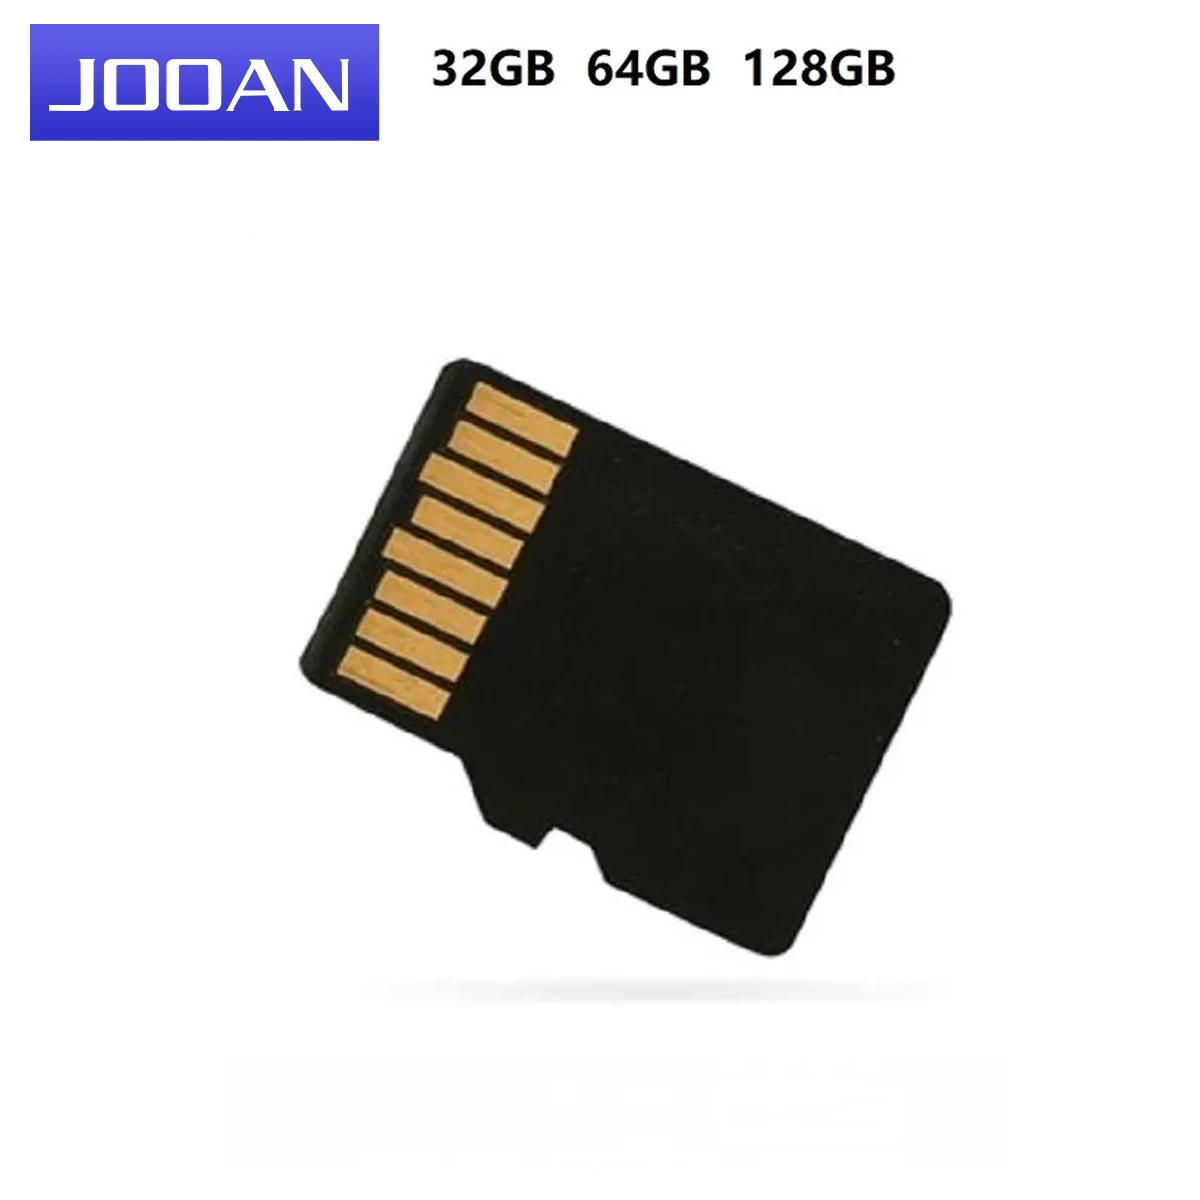 

JOOAN 8G Flash Card Video Record Memory Card 8GB Microsd SD Cards For IP Camera Wifi Camera Home Security Surveillance